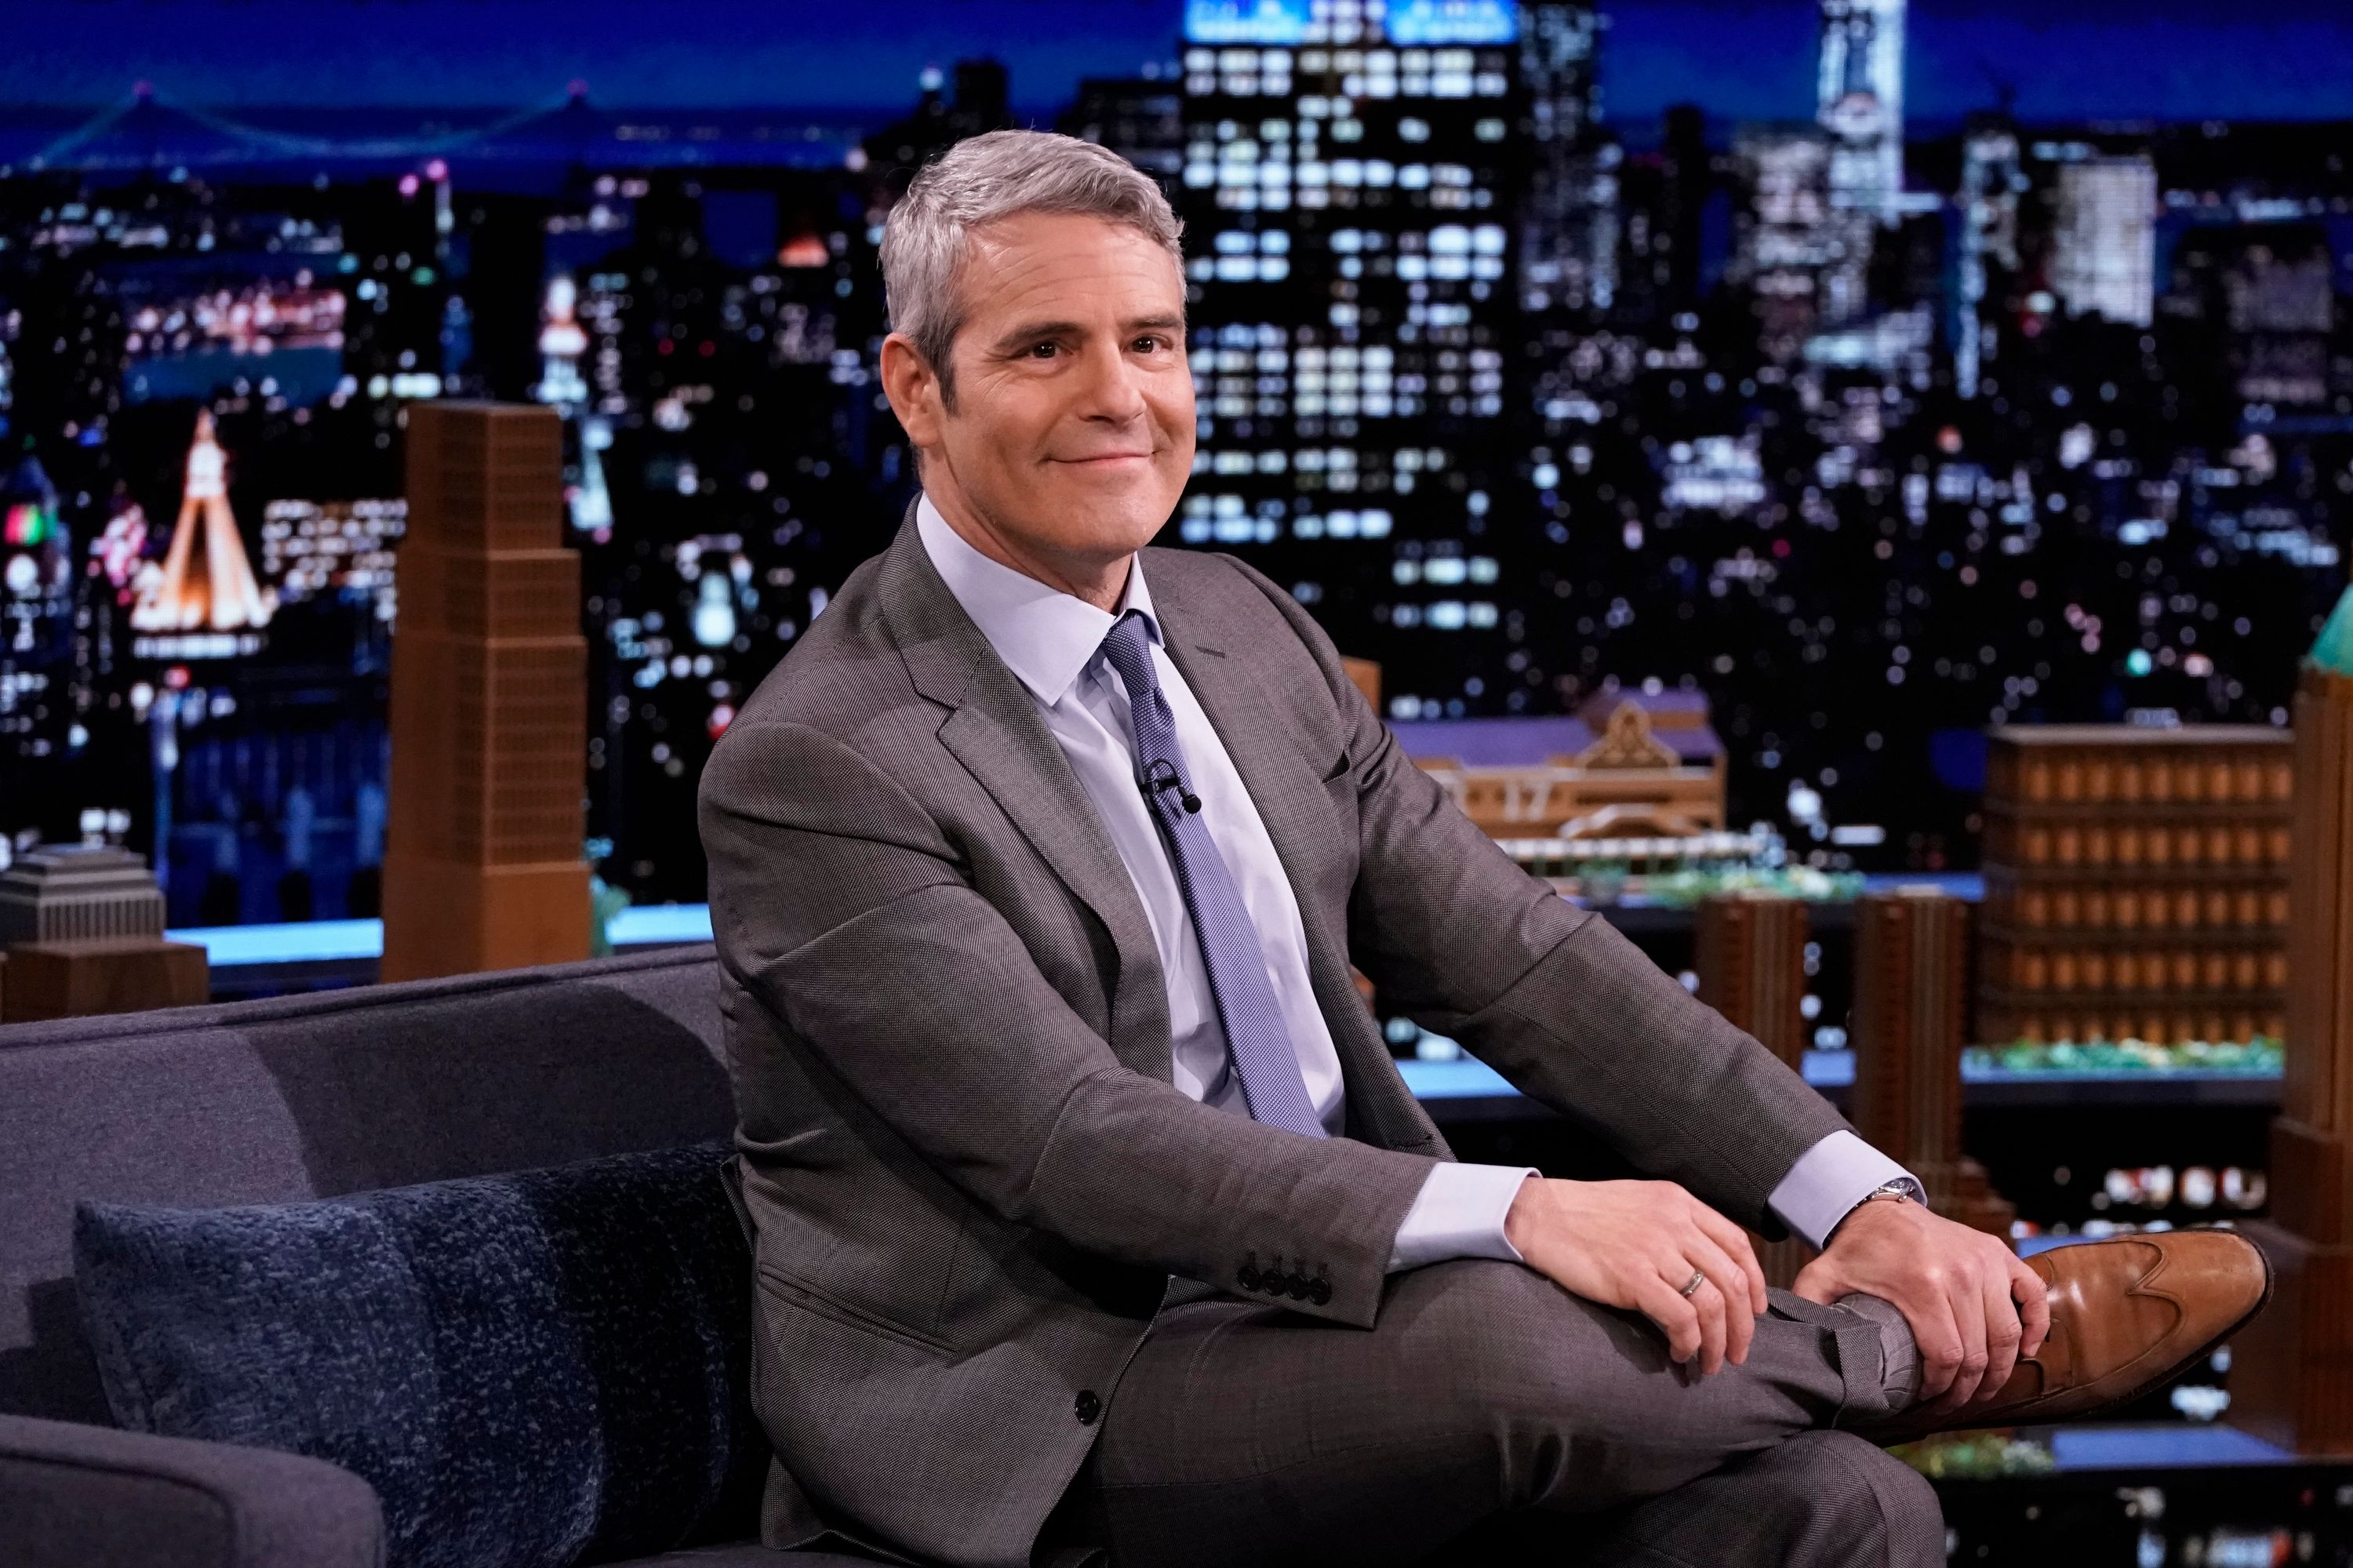 Andy Cohen at an interview on March 22, 2021 | Photo: Getty Images